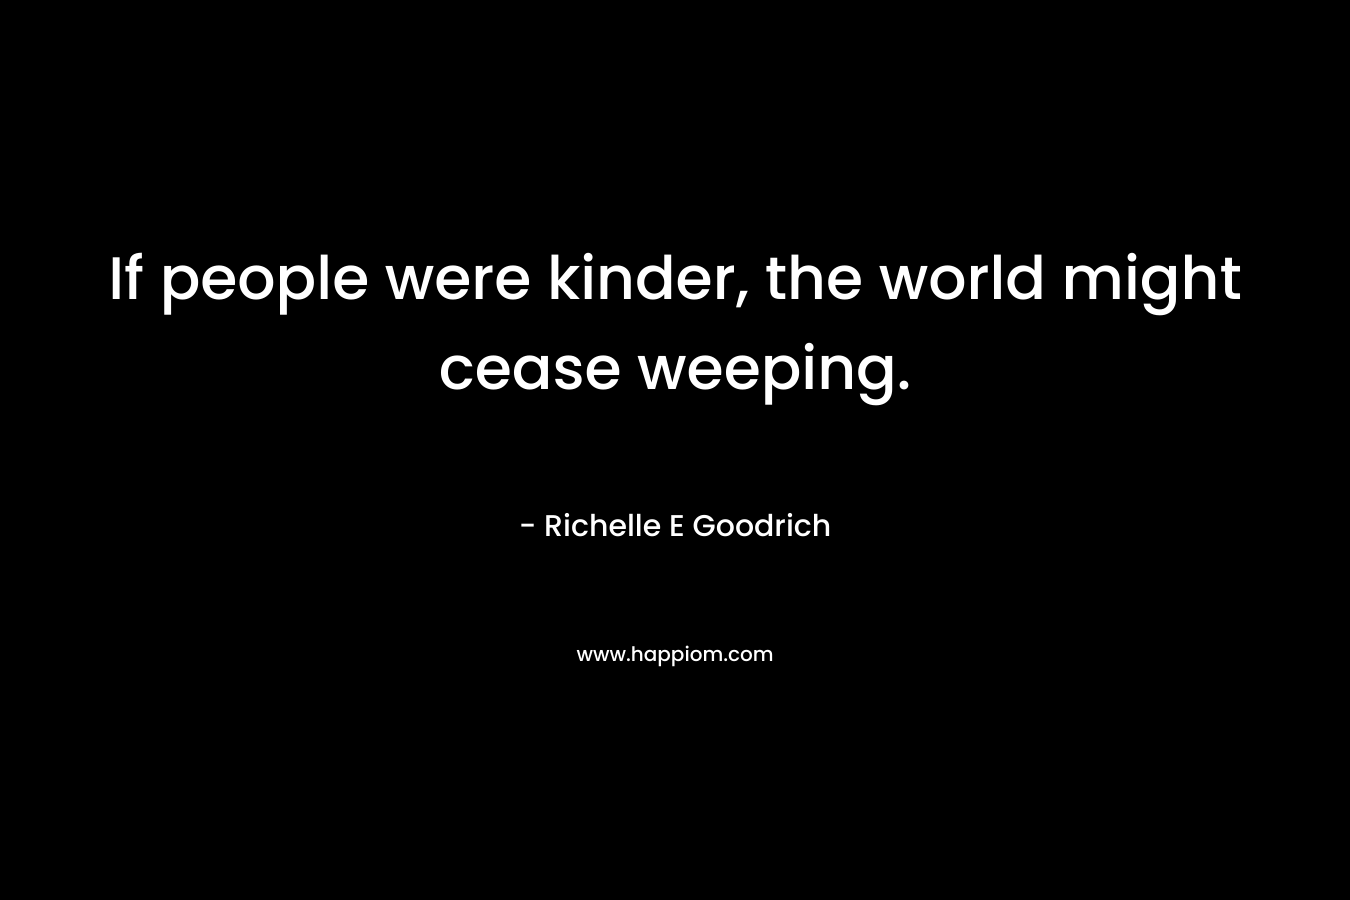 If people were kinder, the world might cease weeping. – Richelle E Goodrich